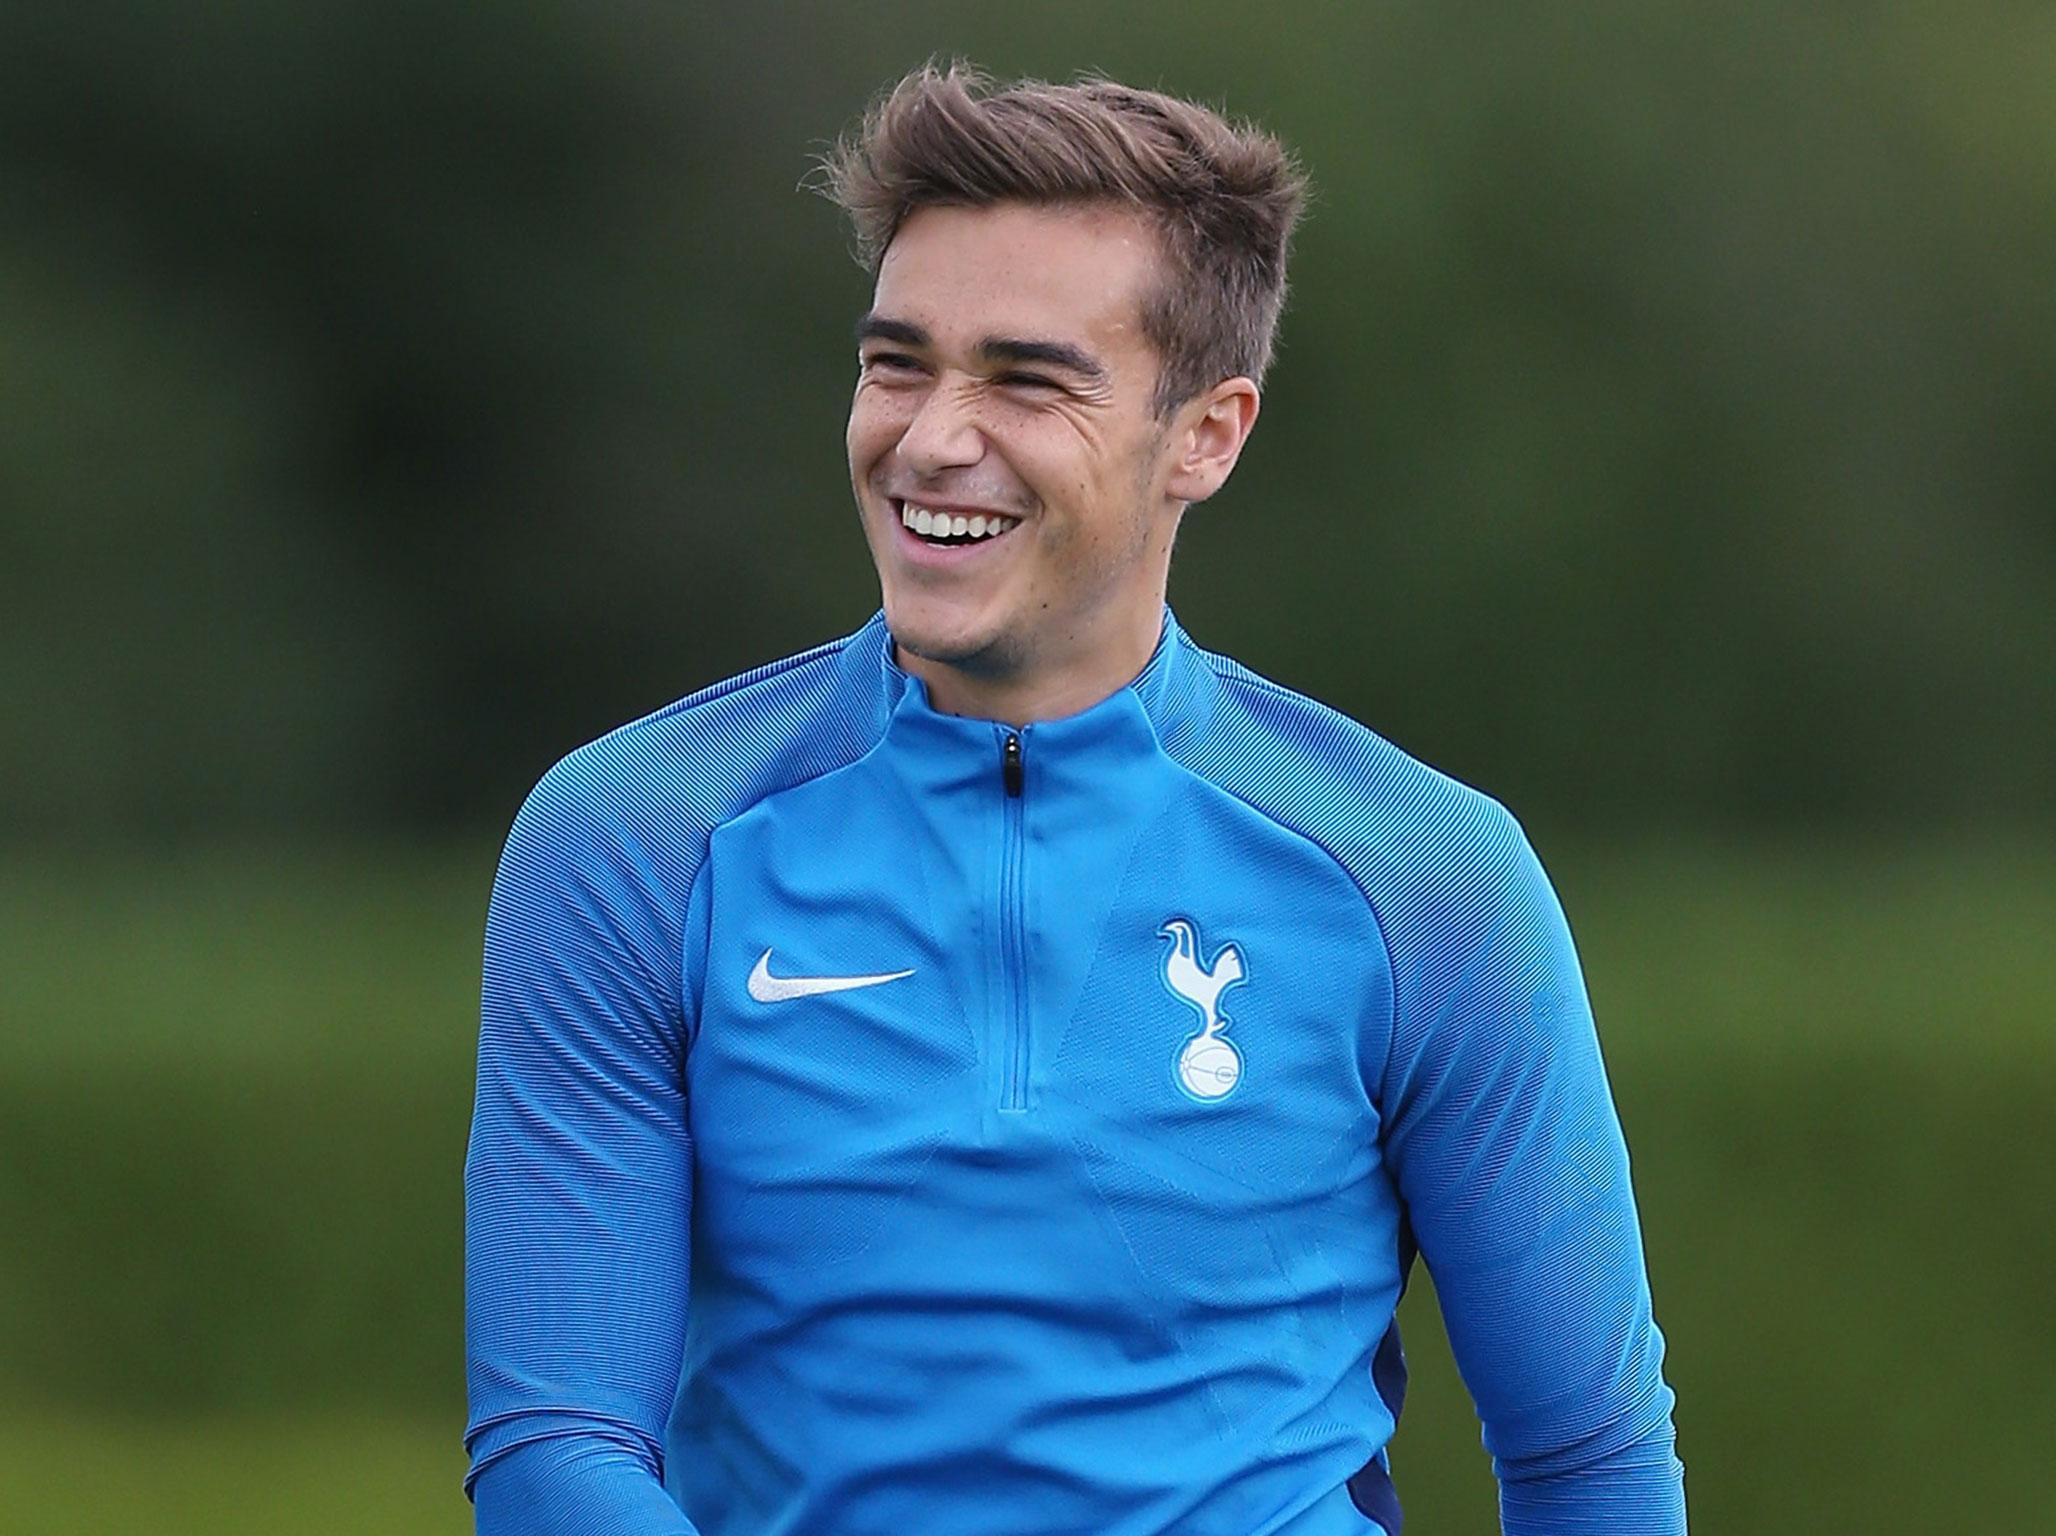 Tottenham's Winks has been named in the squad